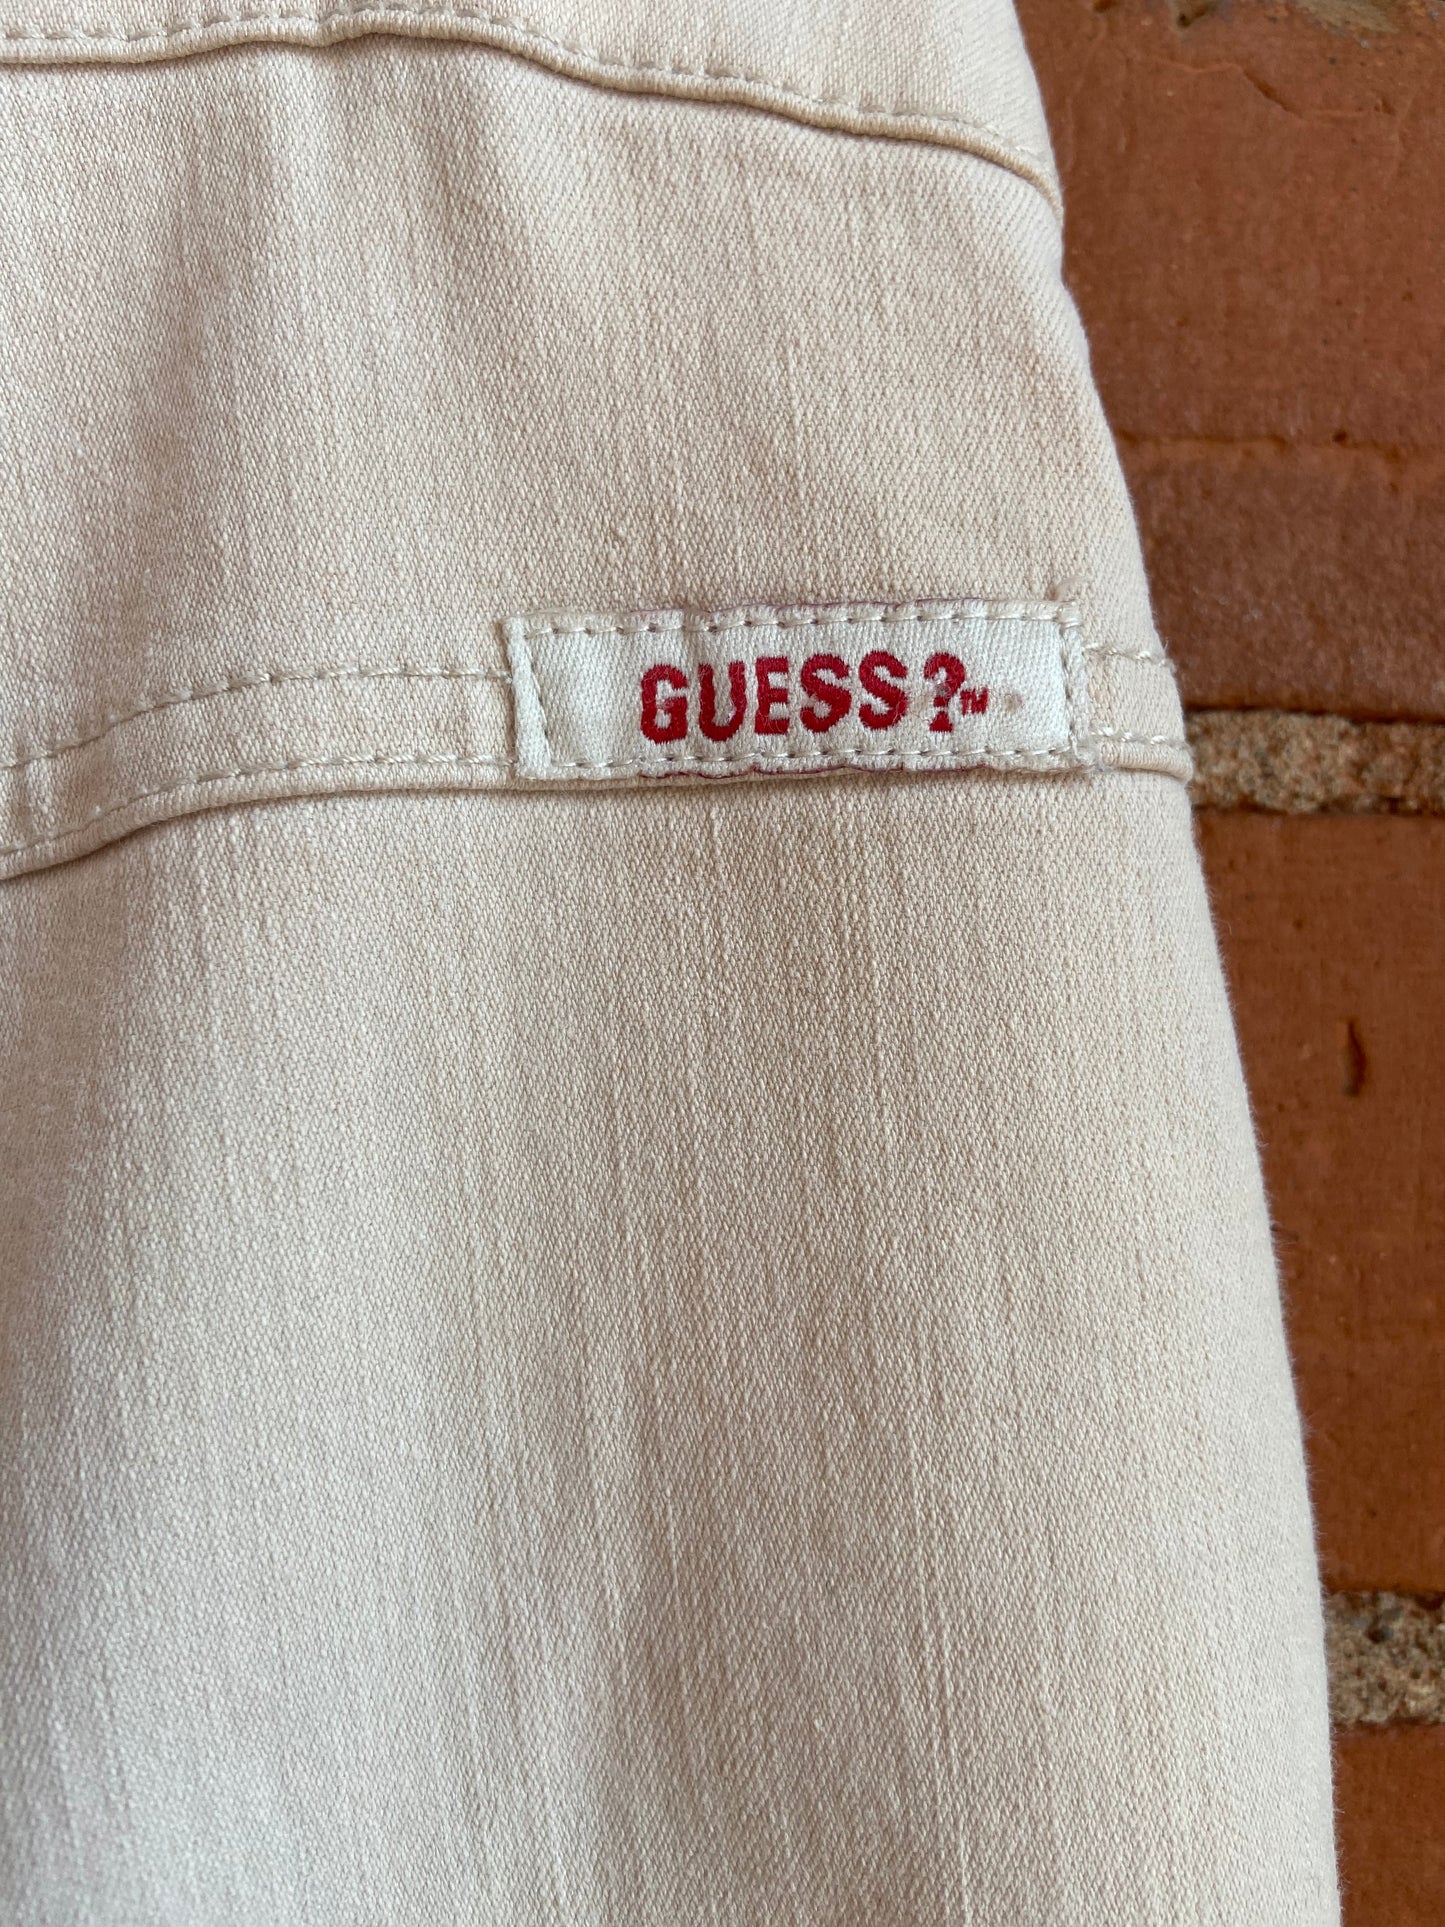 Y2K “Guess Jeans” Low Waisted Flare Pants